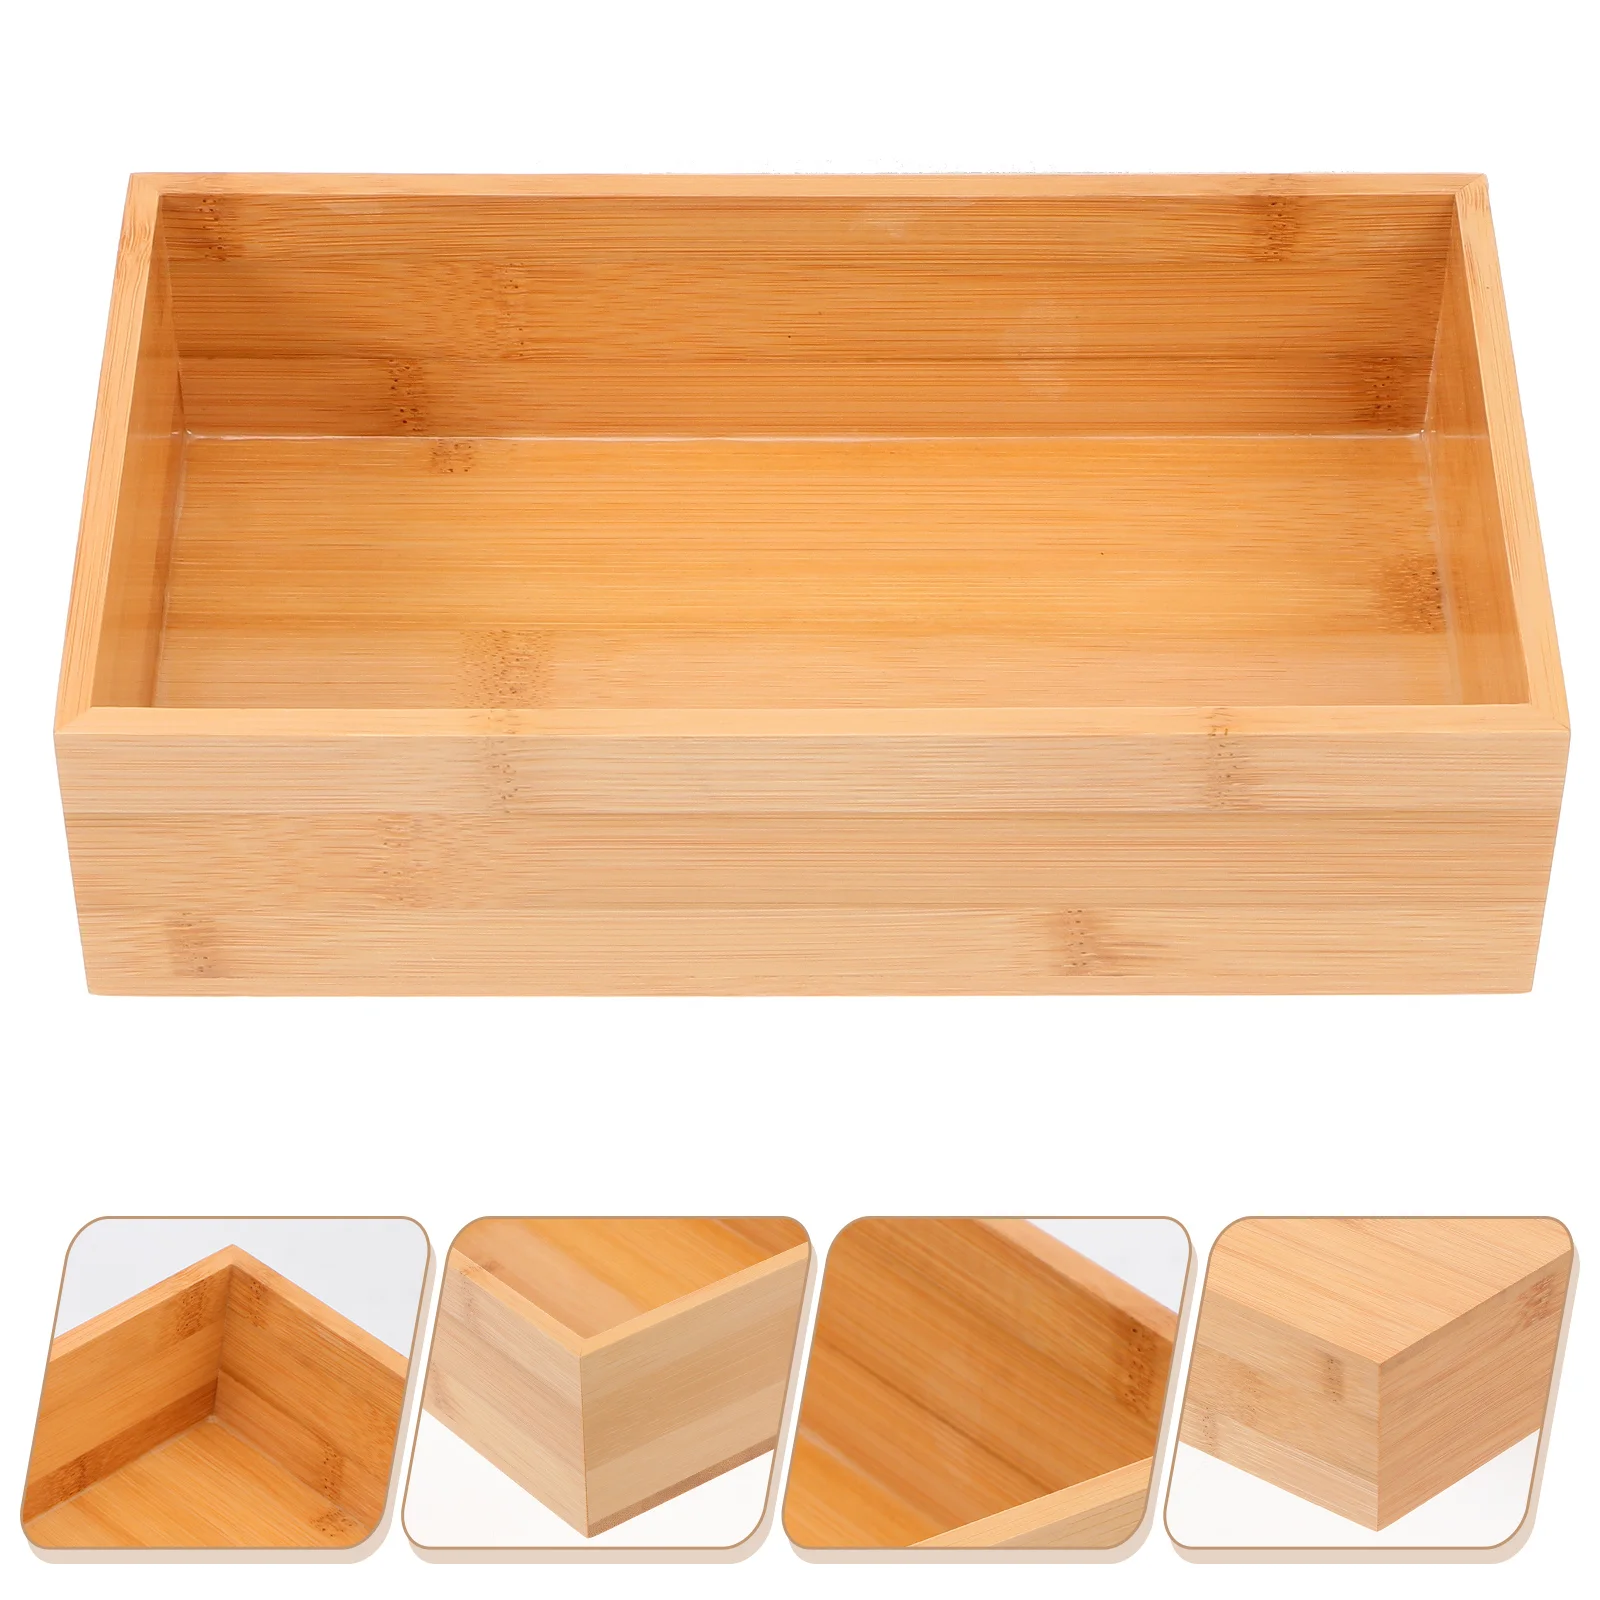 

Bamboo Storage Box Wooden Home Assistant Living Room Decoration Cover Desktop Finishing Office